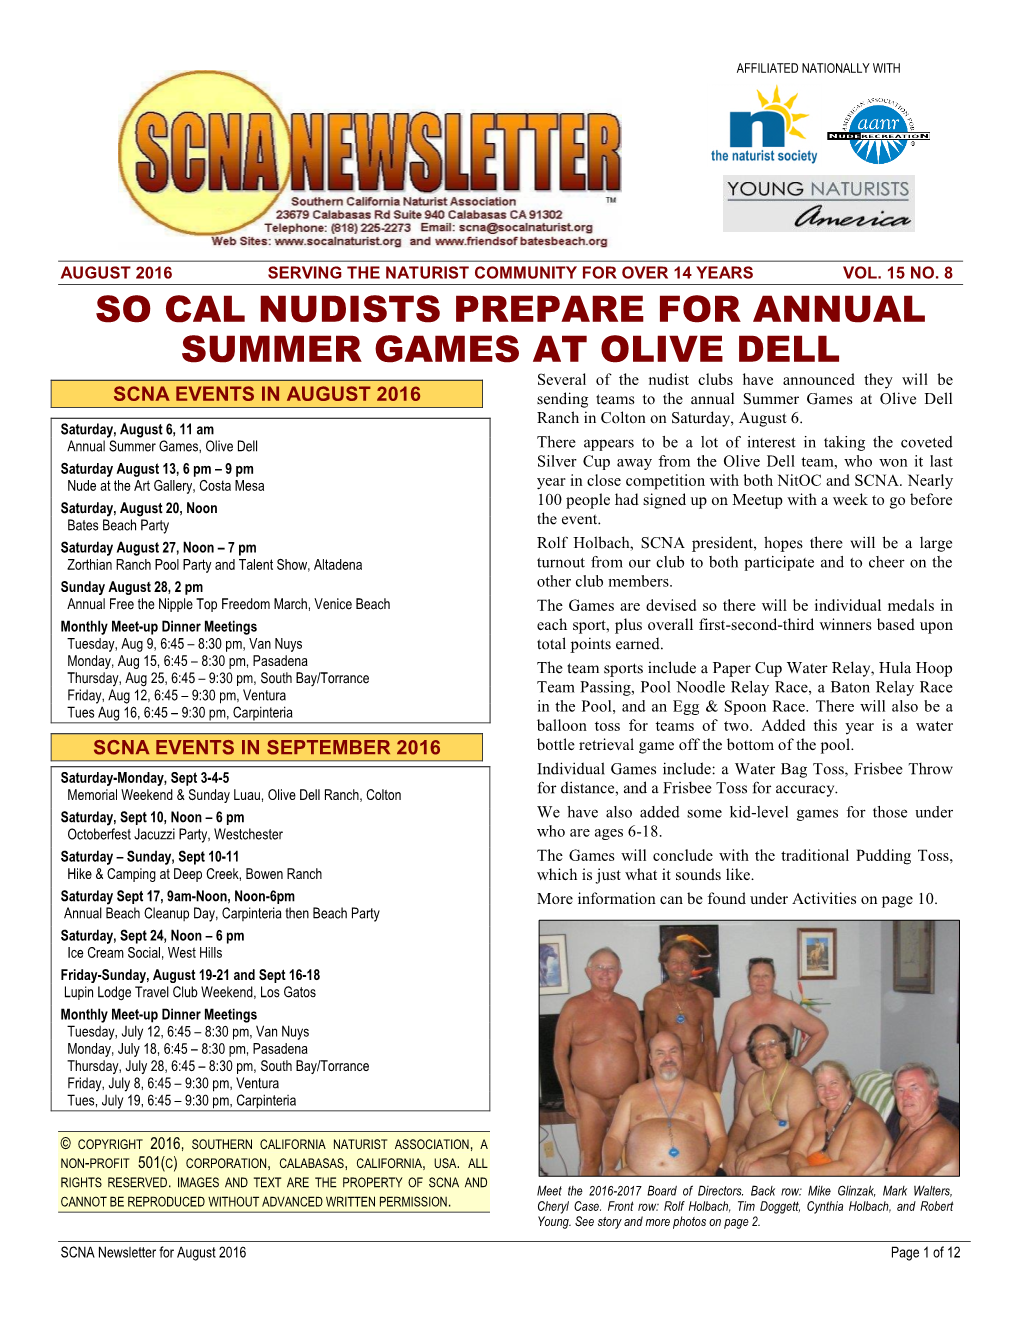 So Cal Nudists Prepare for Annual Summer Games At